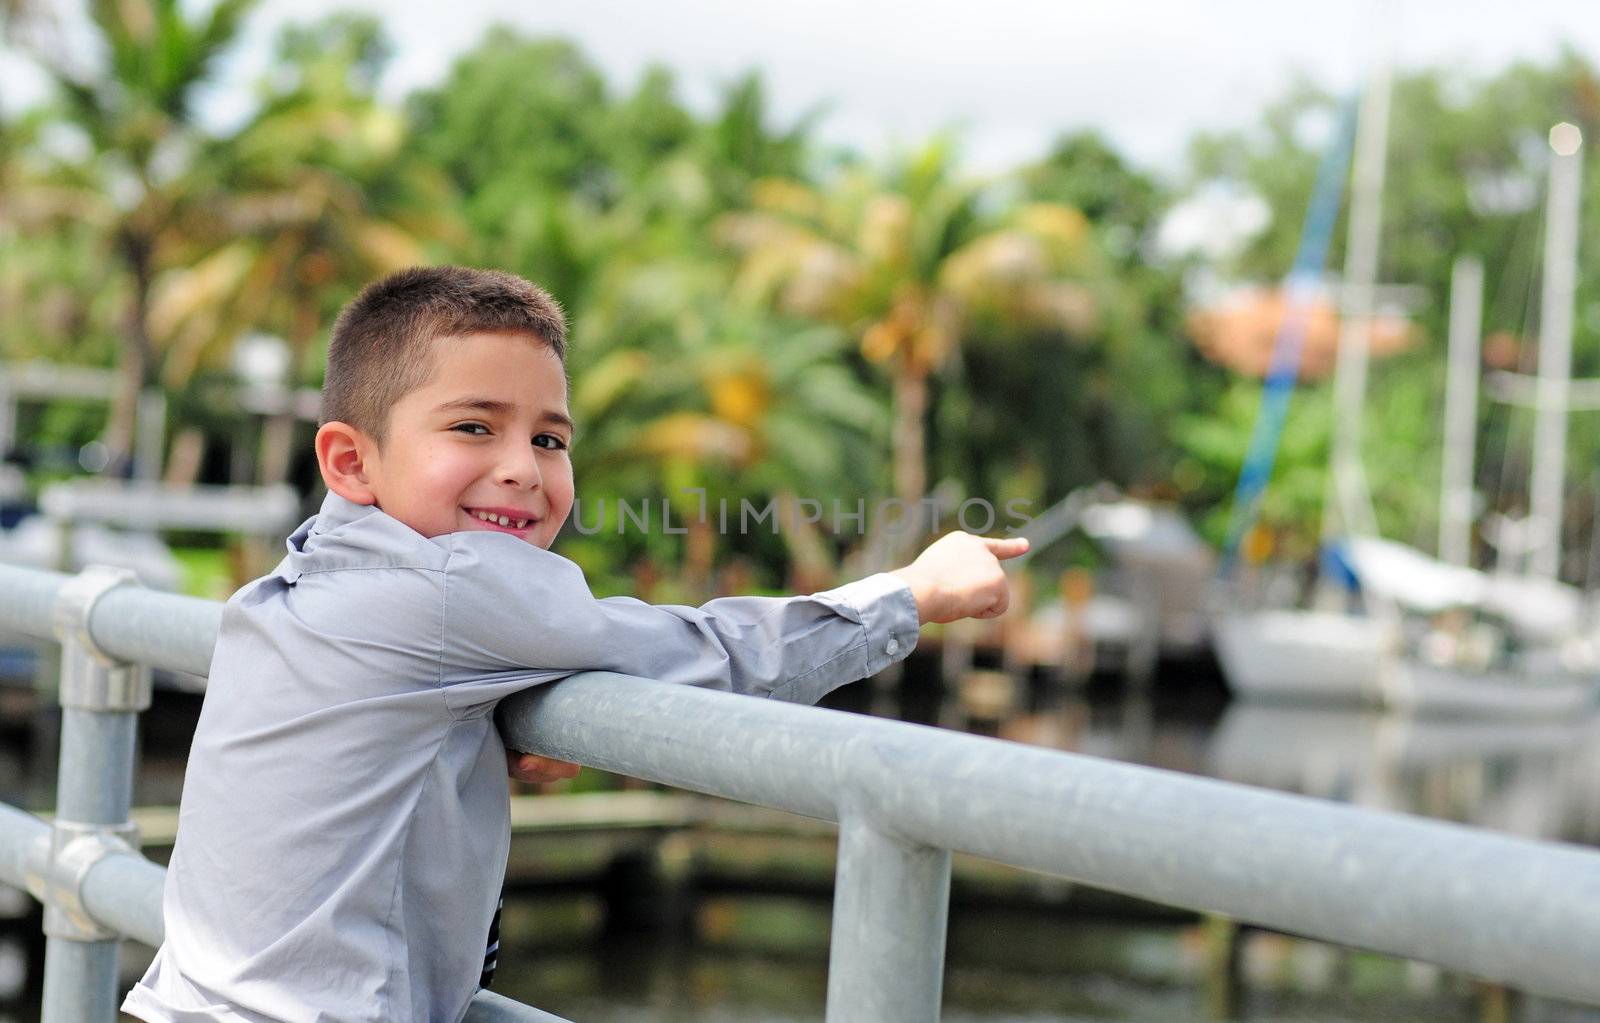 Very happy child pointing at boats by ftlaudgirl